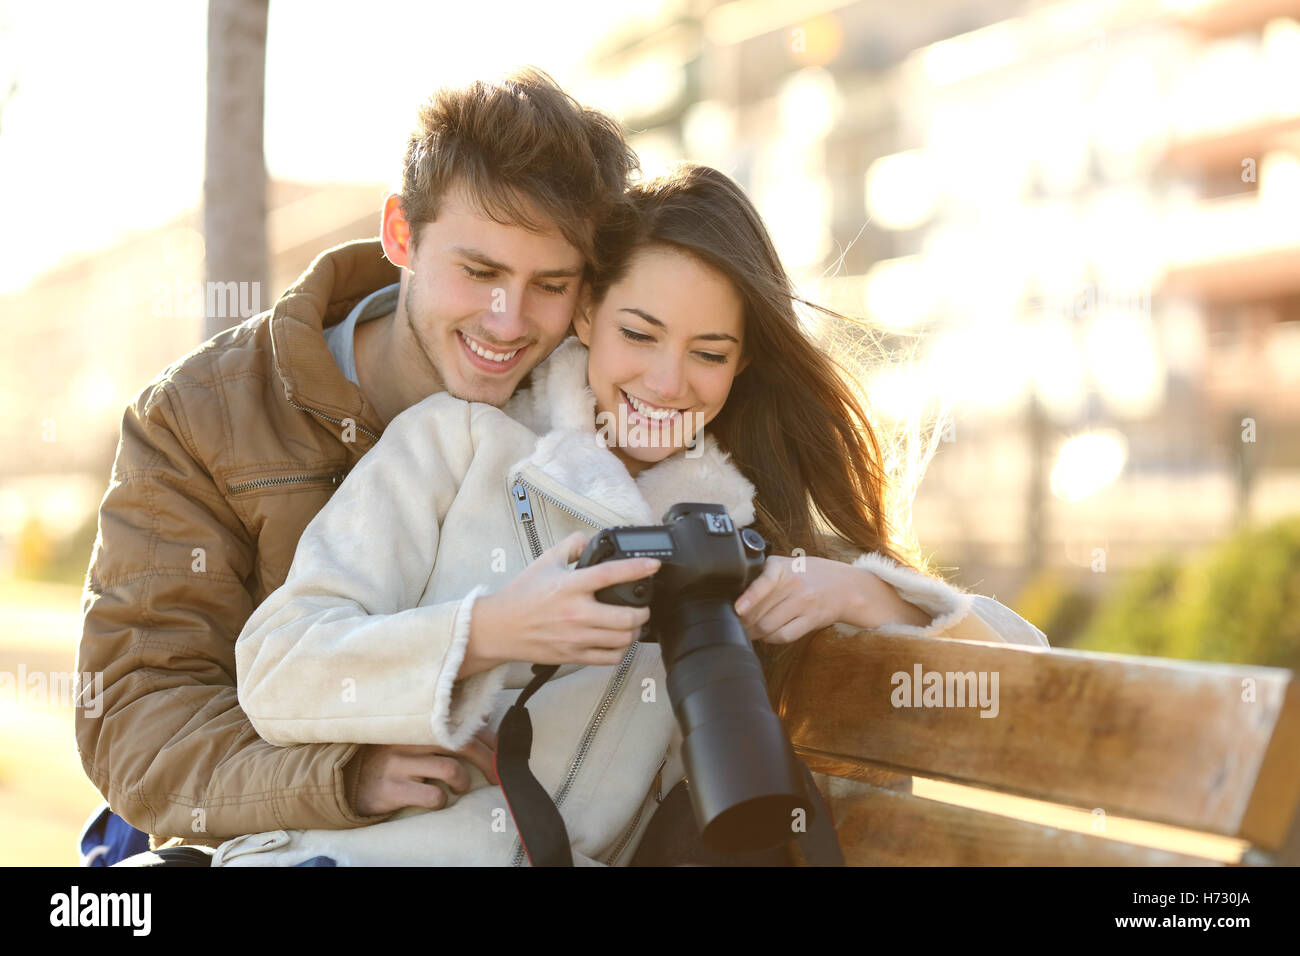 Couple of tourists reviewing photos in a dslr camera Stock Photo